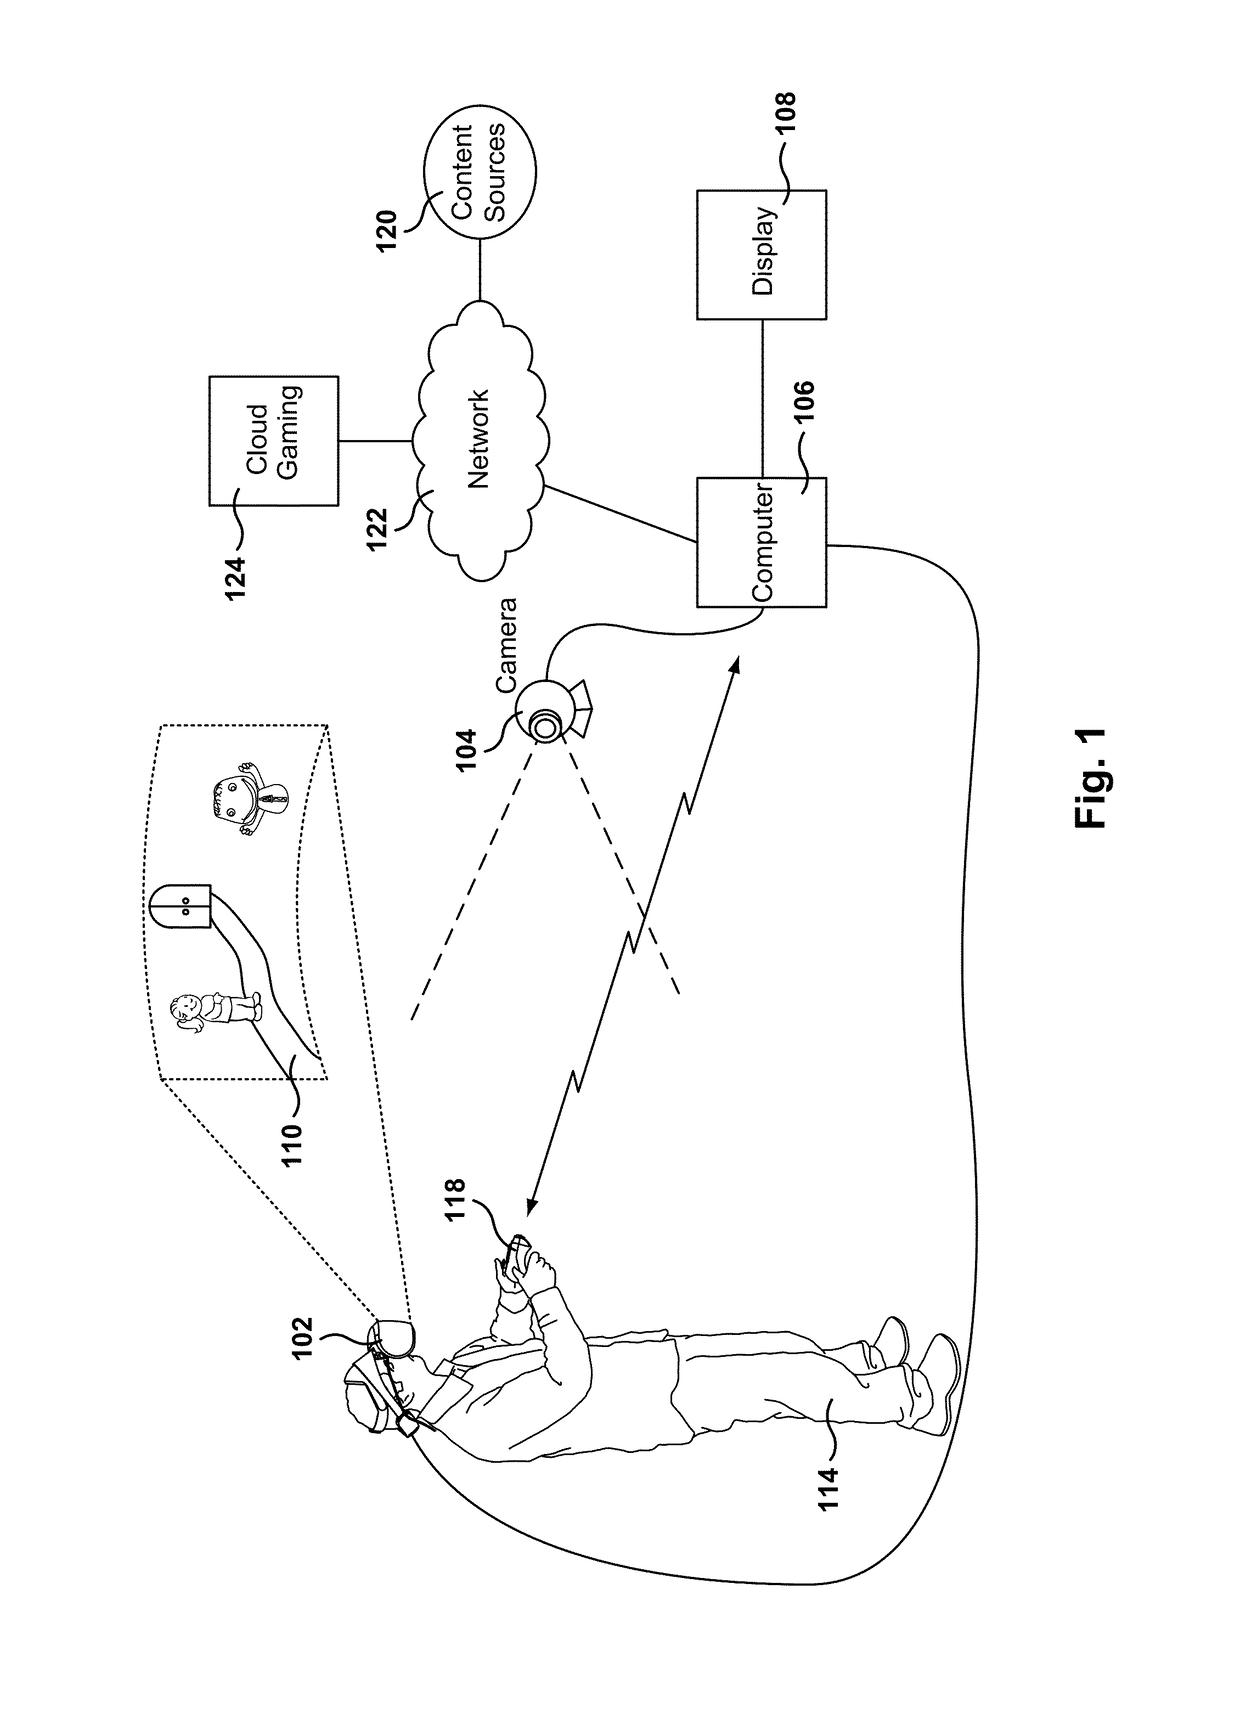 Motion sickness monitoring and application of supplemental sound to counteract sickness